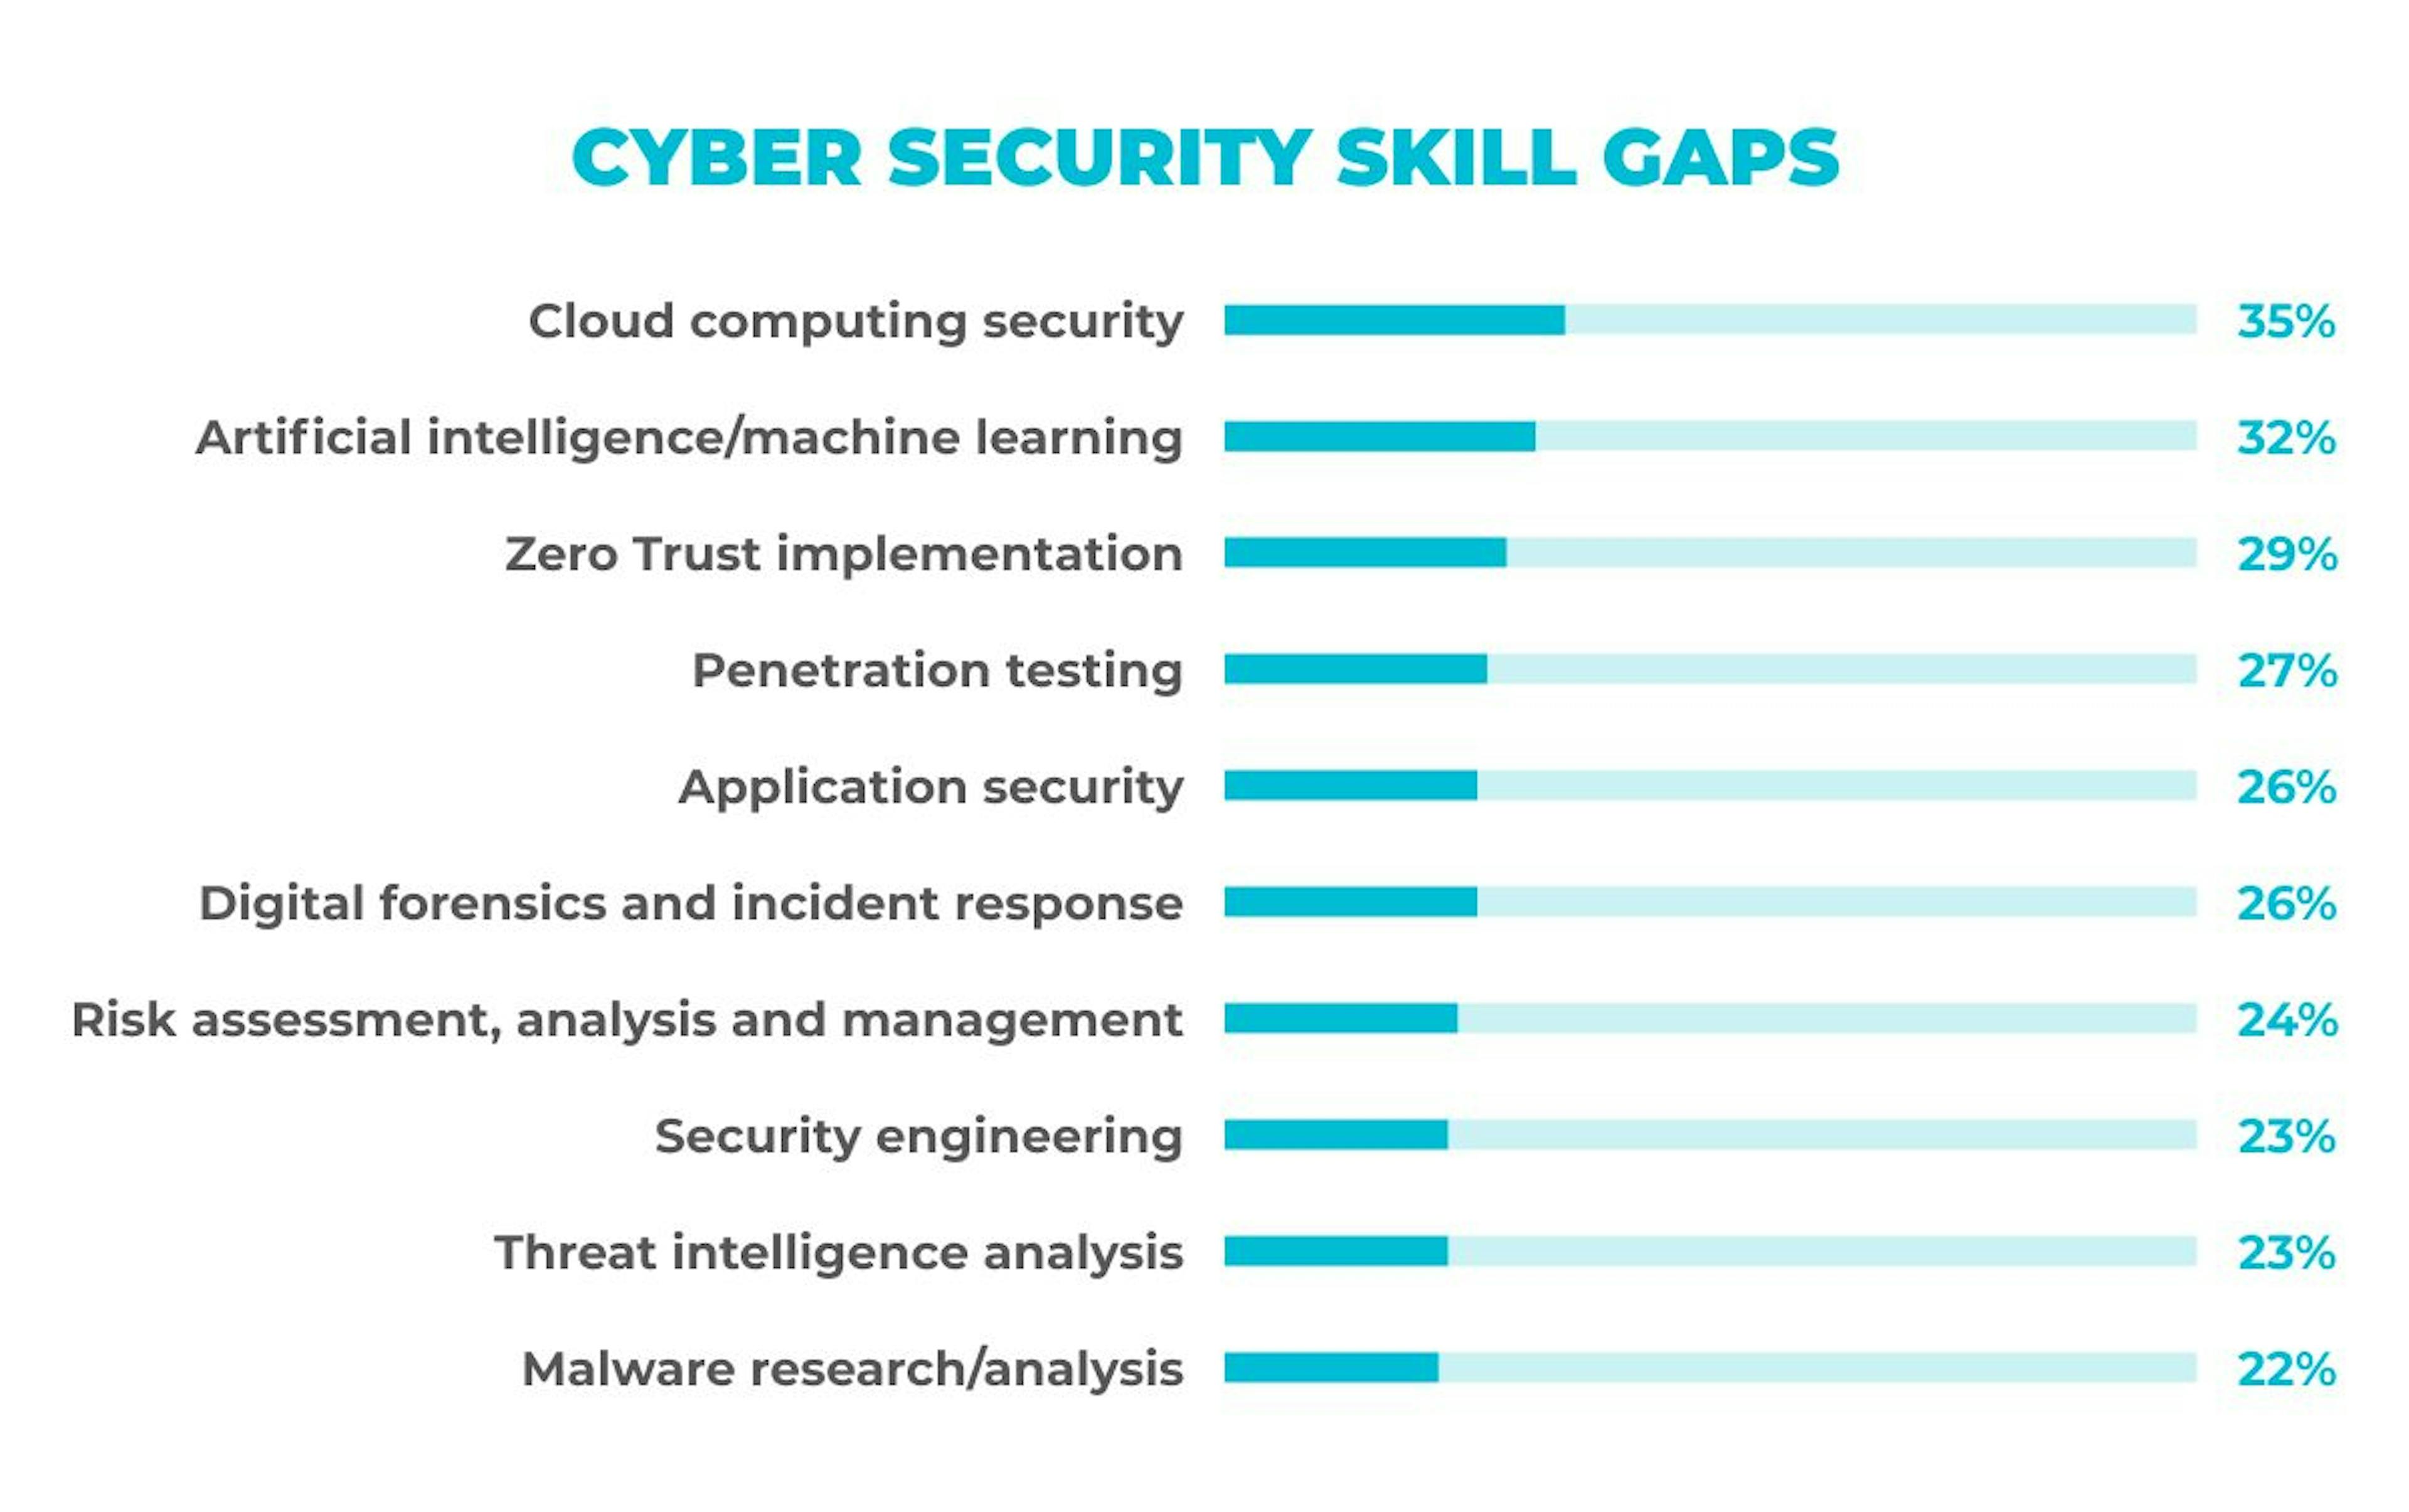 Source: ISC2 Cybersecurity Workforce Study